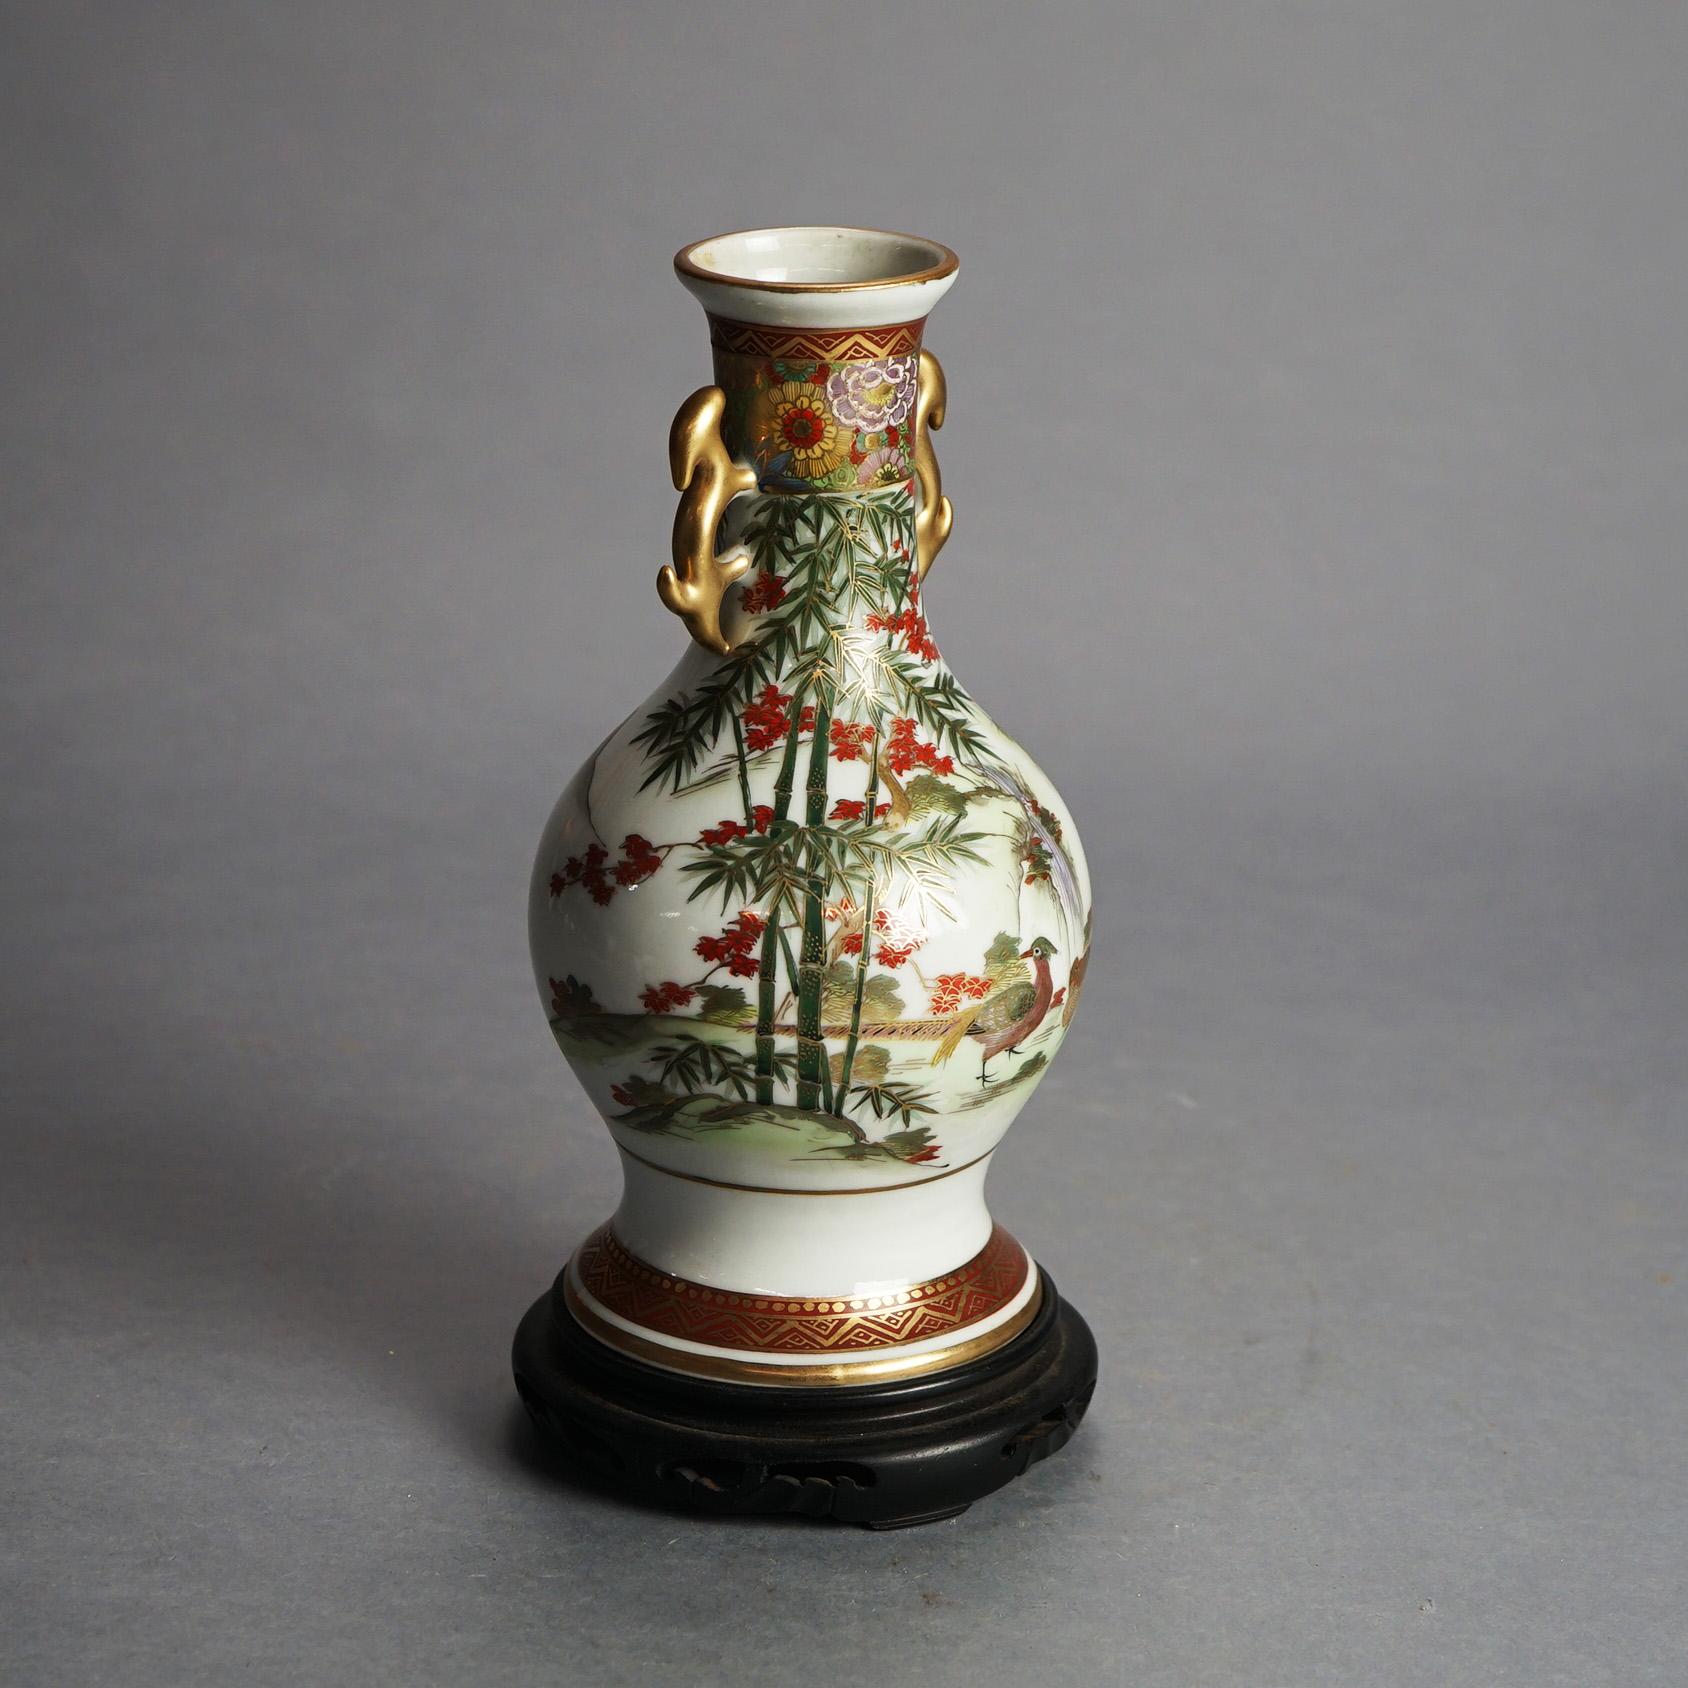 Antique Japanese Satsuma Hand Painted & Gilt Porcelain Double Handled Vase with Garden Scene on Wood Stand C1920

Measures - 11